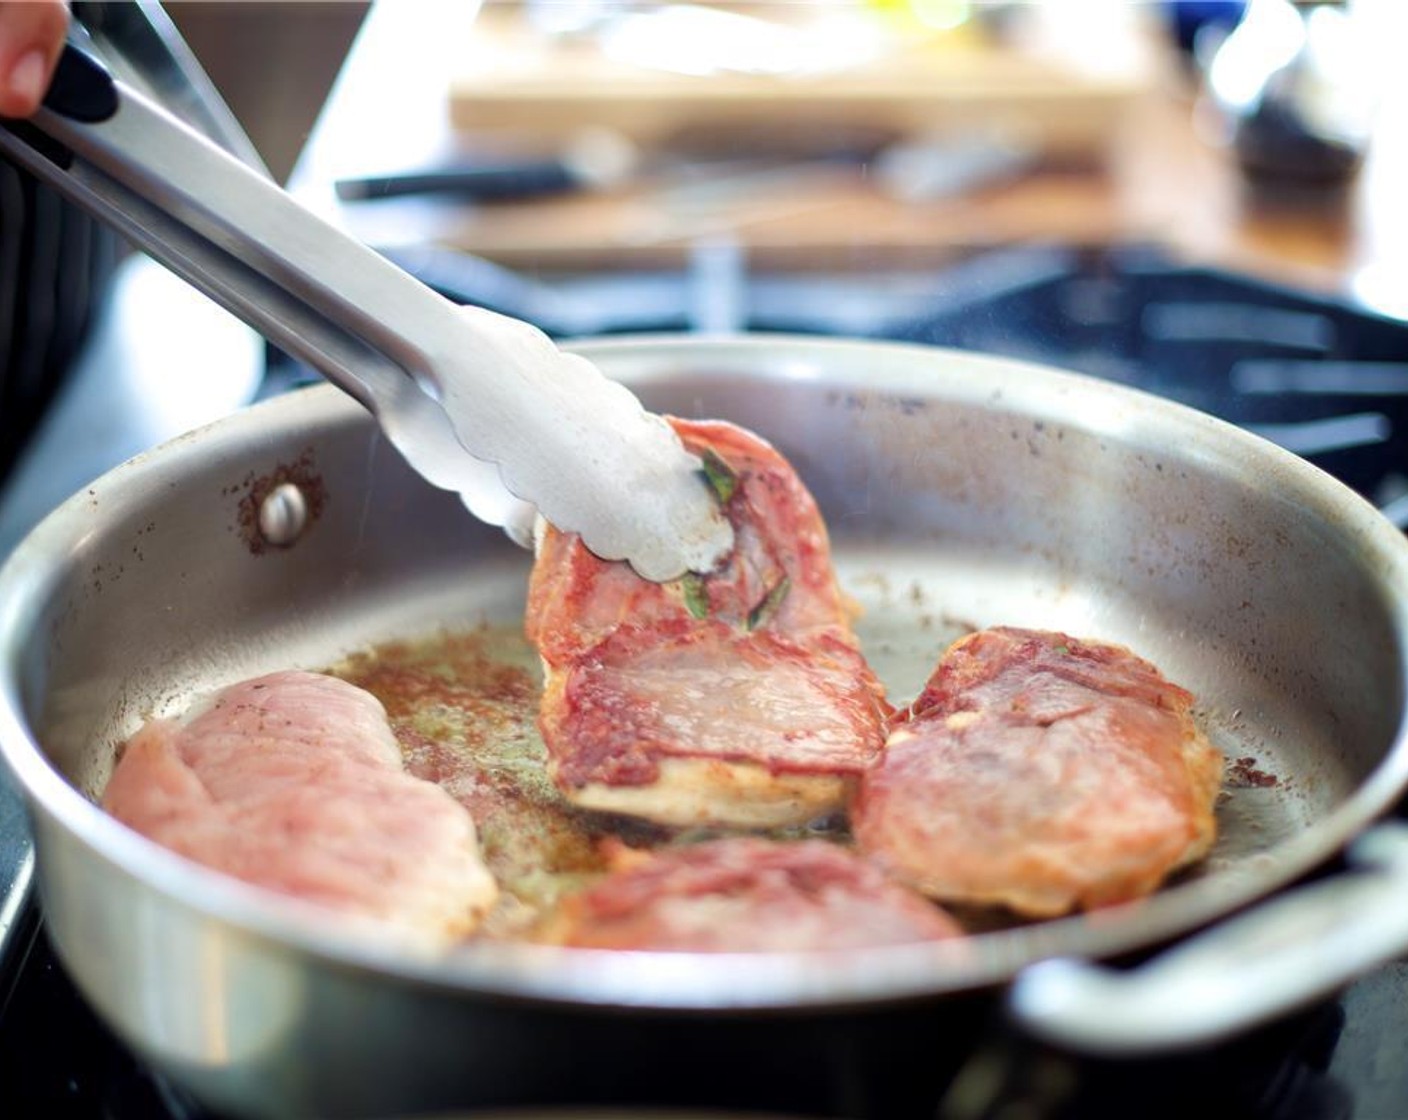 step 5 Heat Olive Oil (1 Tbsp) and half of the remaining Butter (1 Tbsp) in a large saute pan over medium-high heat. When butter is melted, add turkey cutlets with the prosciutto face down and cook for 2 minutes.